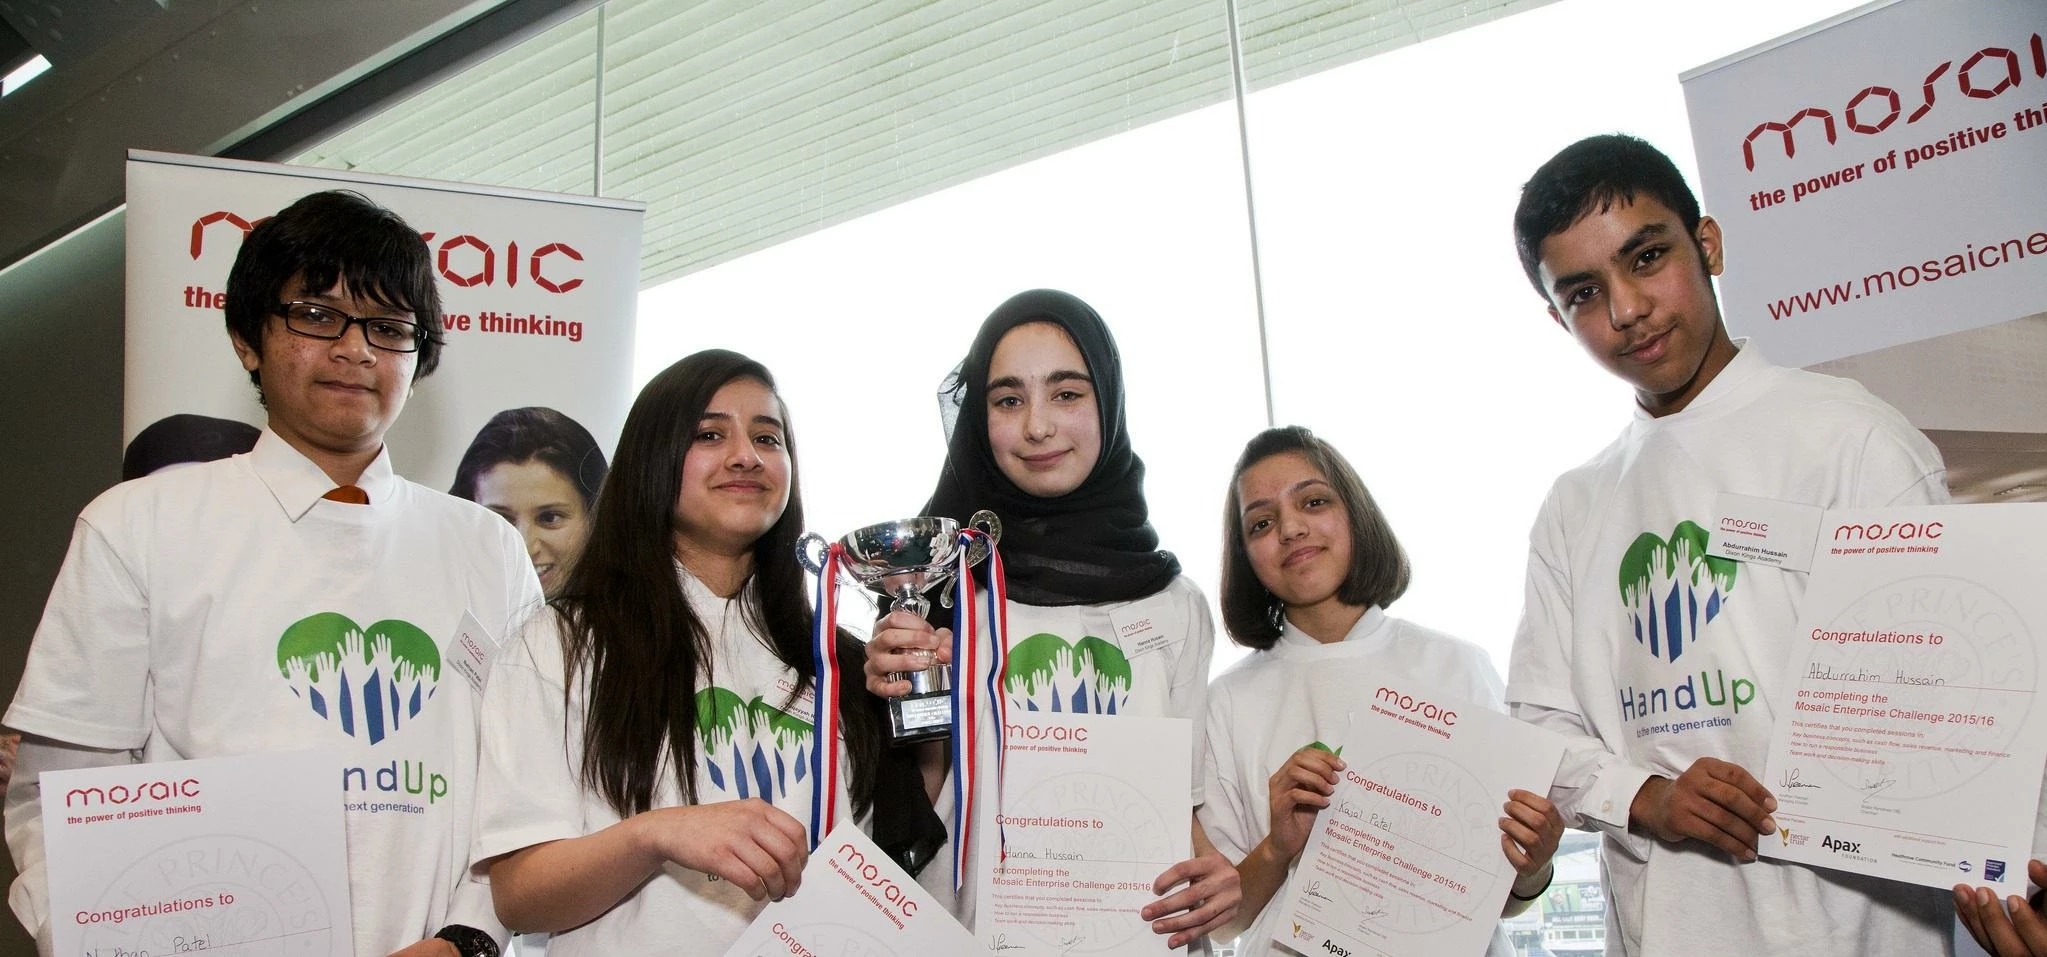 Pupils from Dixons Kings were finalists in Mosaic’s Enterprise Challenge Grand Final last year